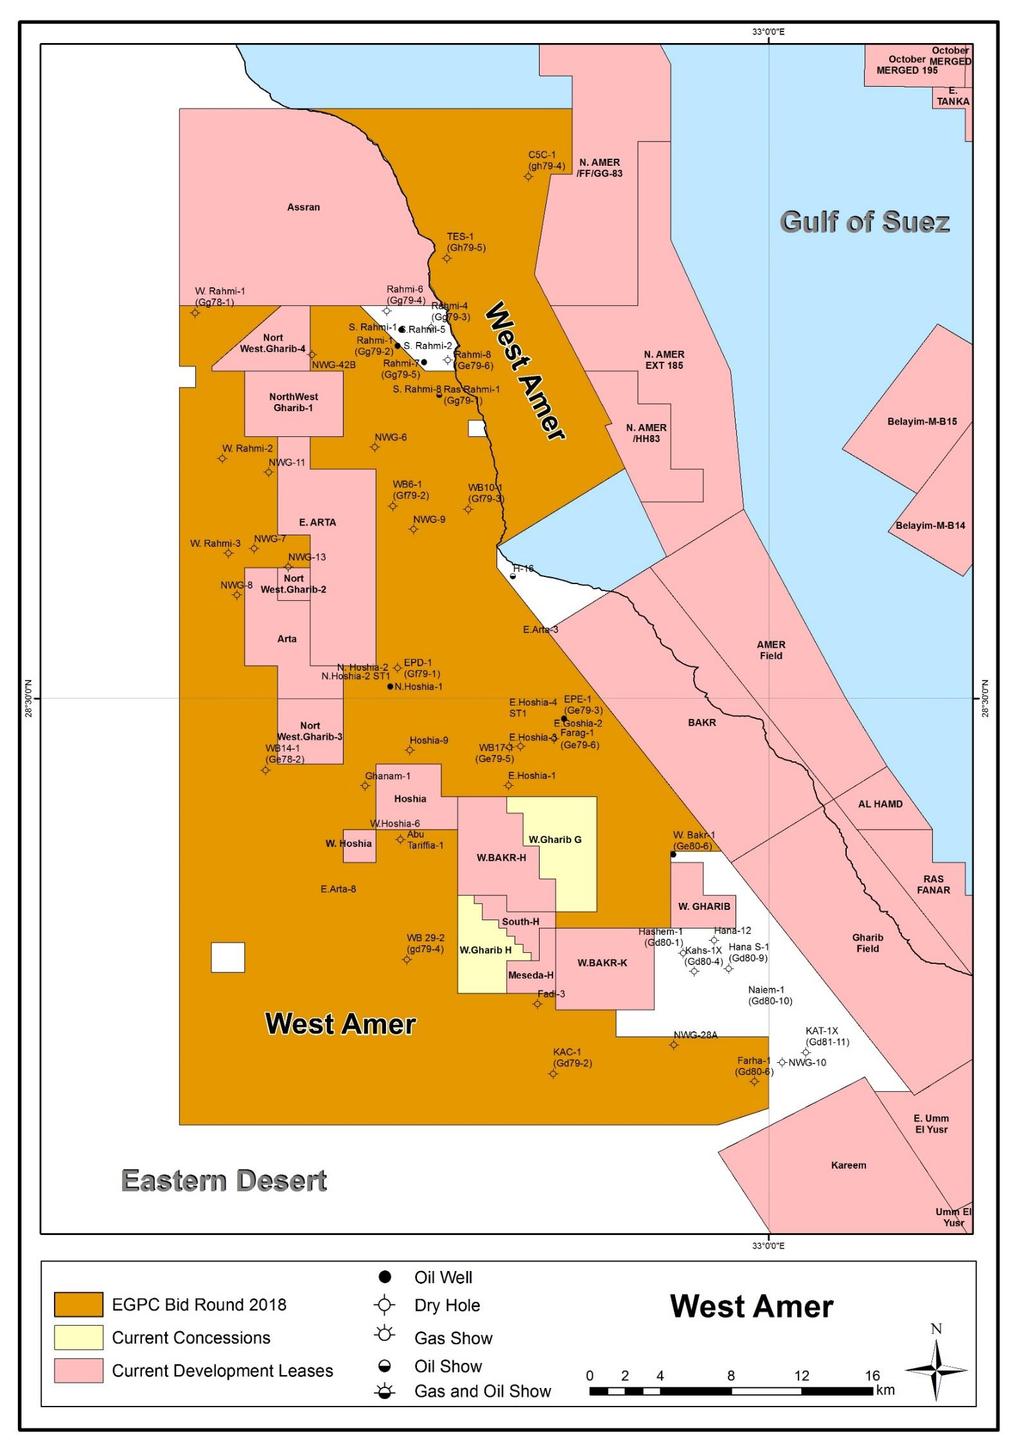 Location : Located in the Middle of the Western flank of the Gulf of Suez. Block Summary Total Area: 875.